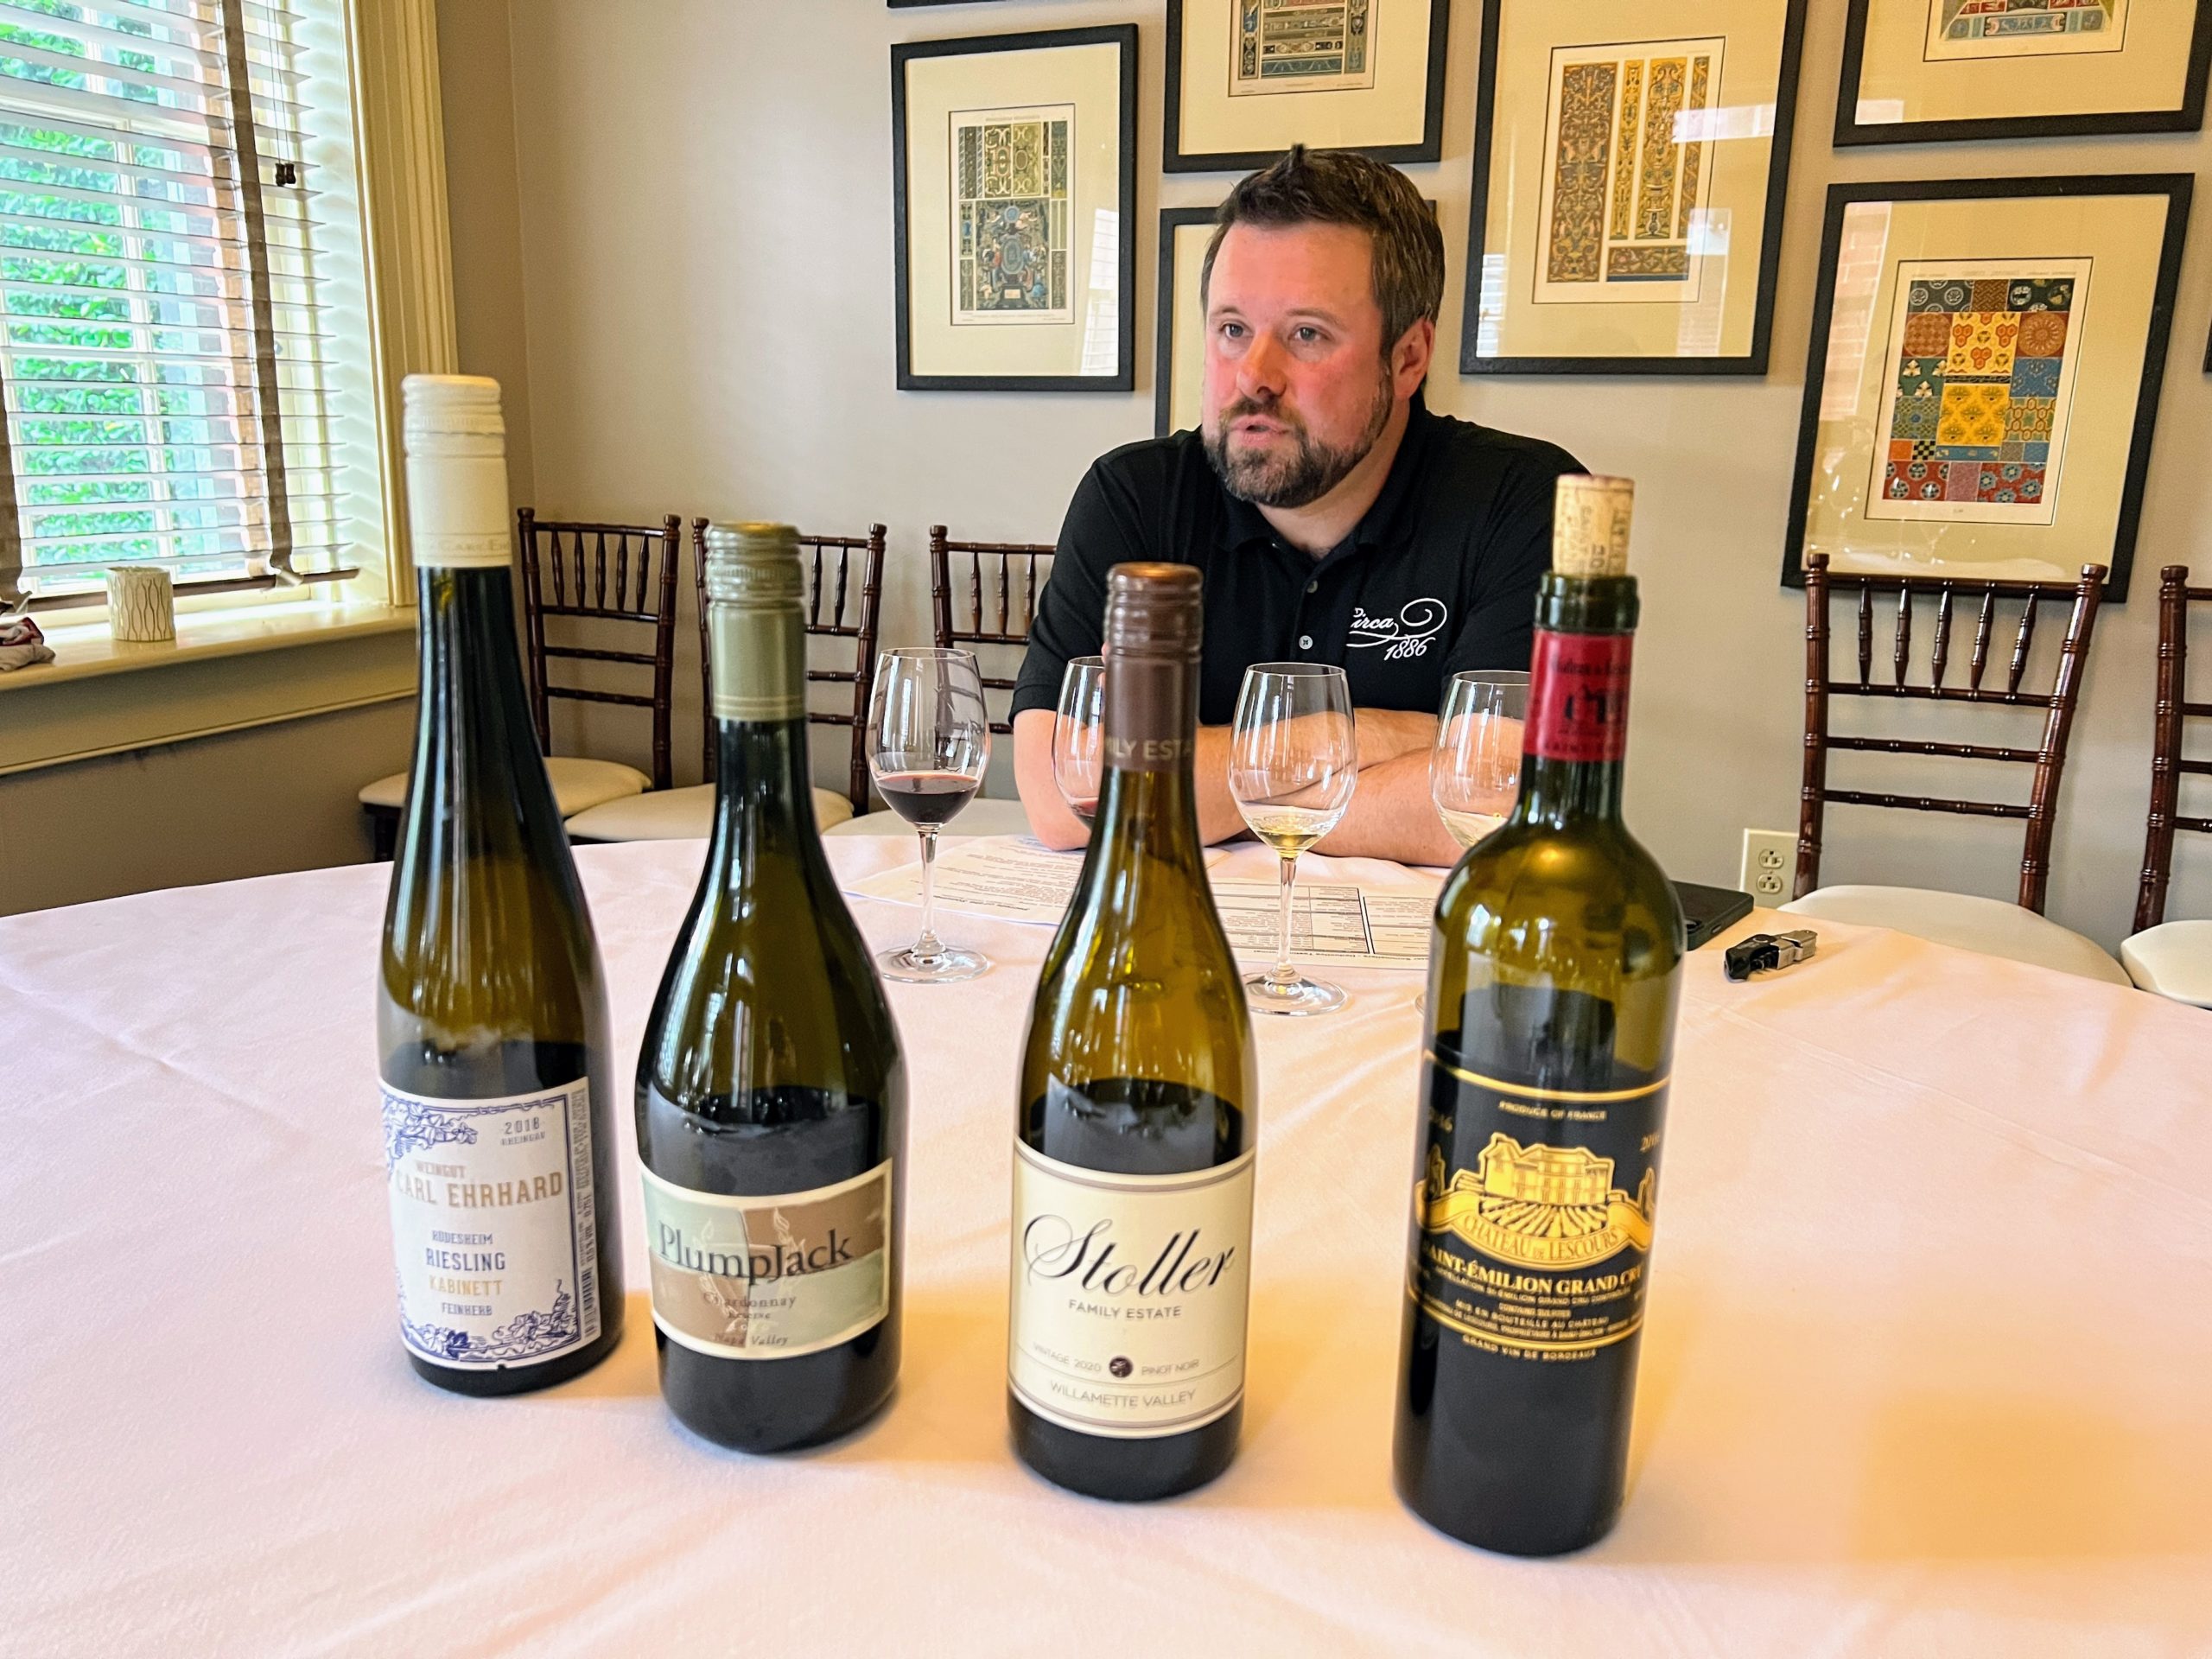 a man sitting at a table with wine bottles